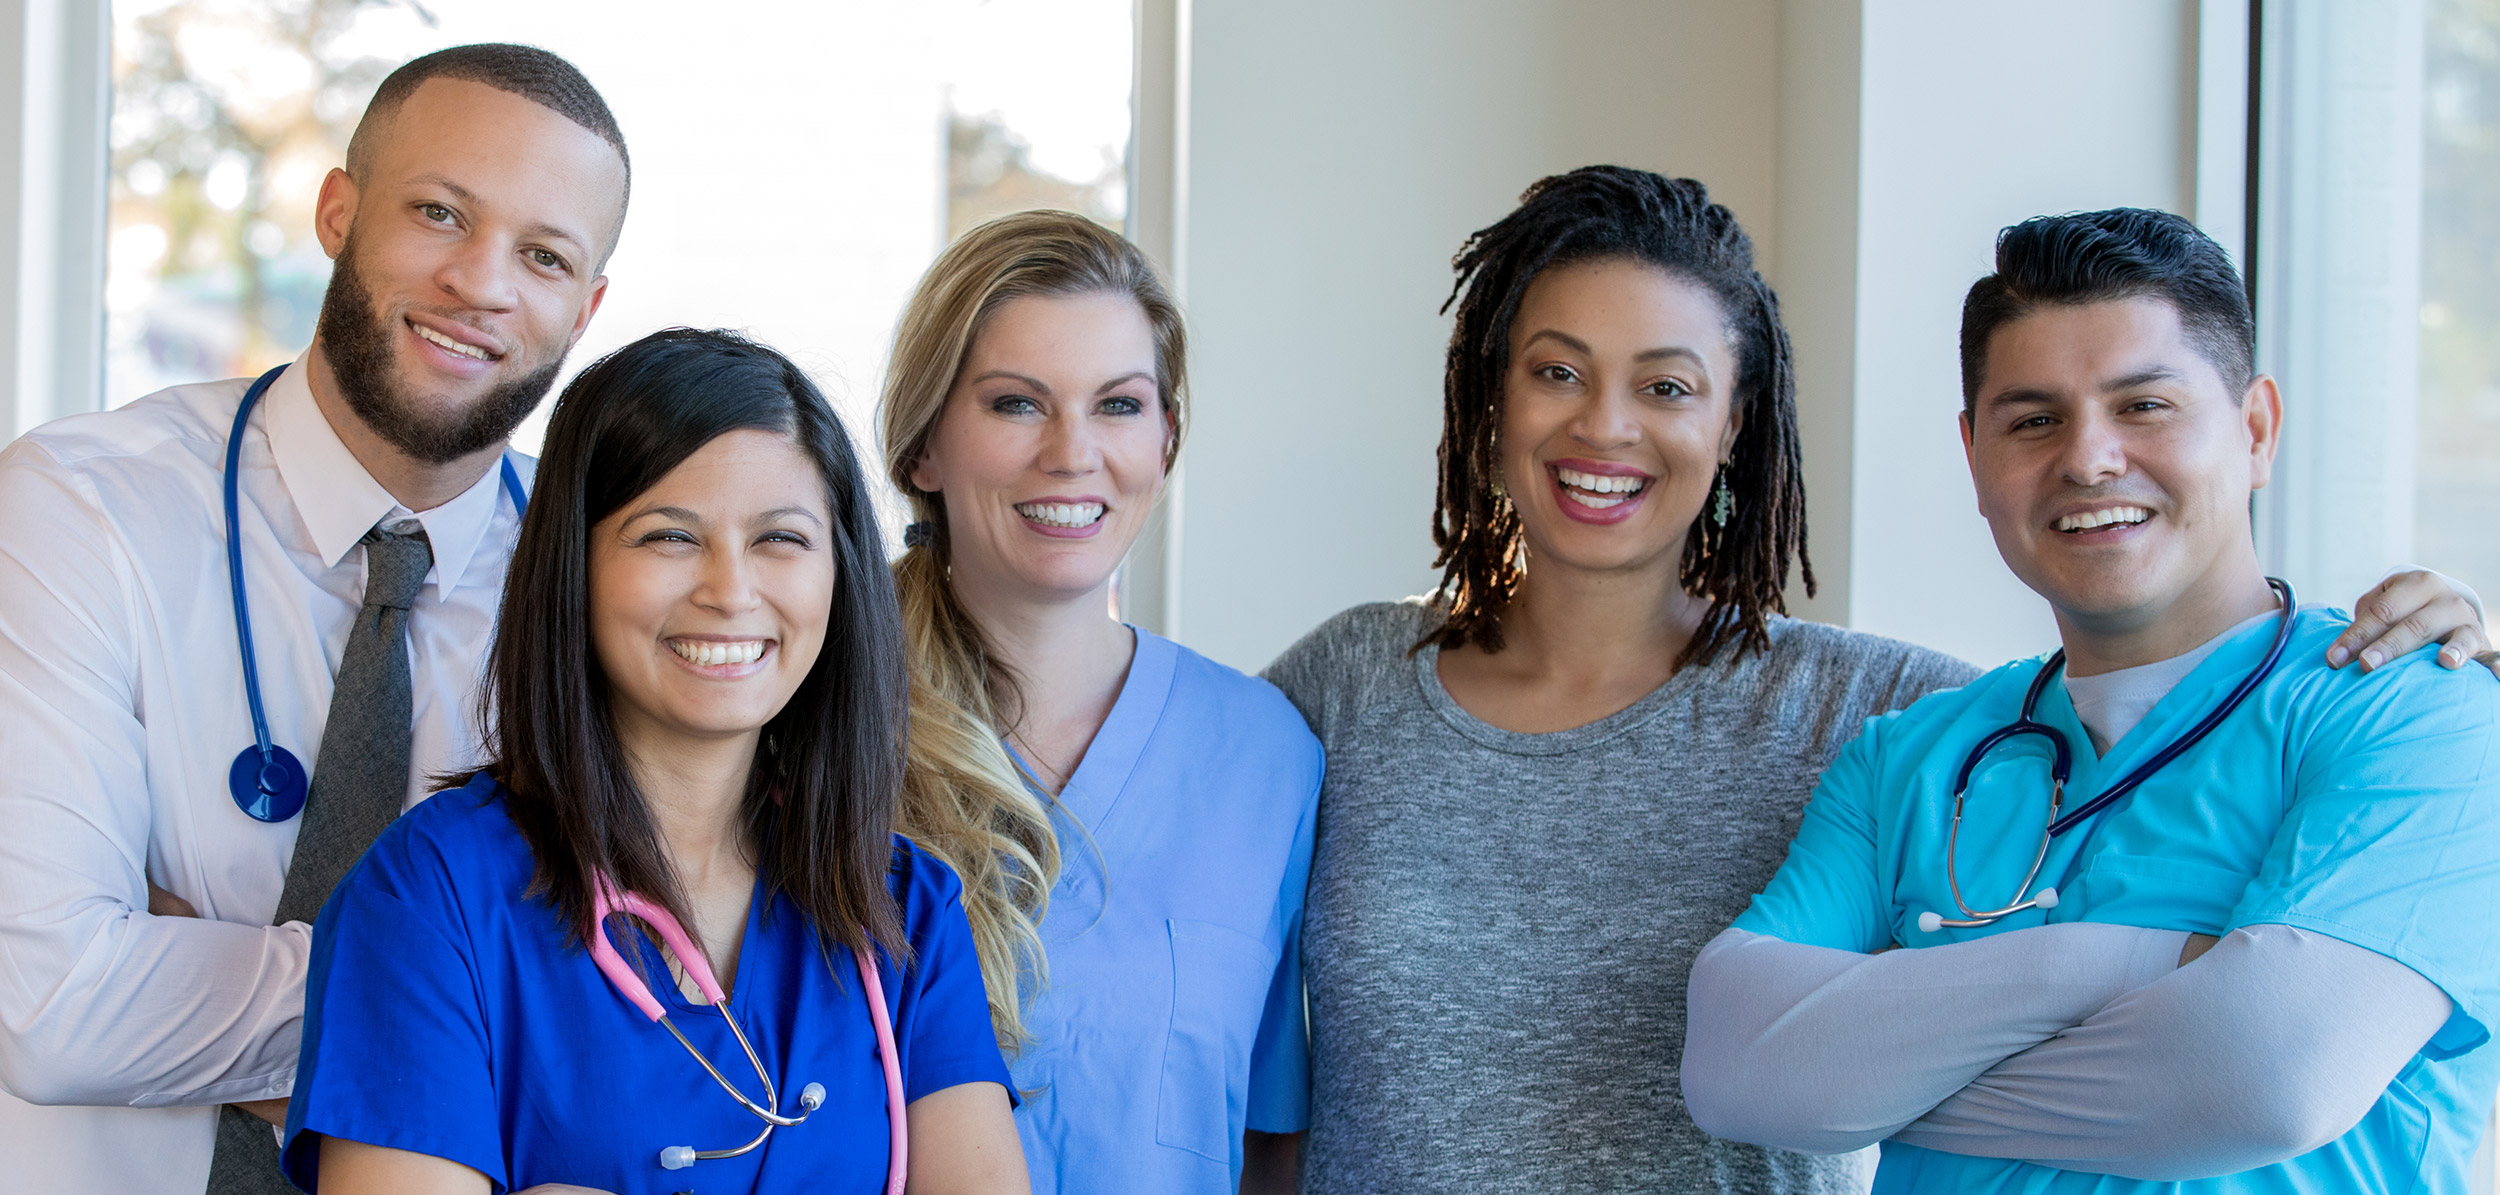 Free Resources to Celebrate the 10th Anniversary of GI Nurses and Associates Week